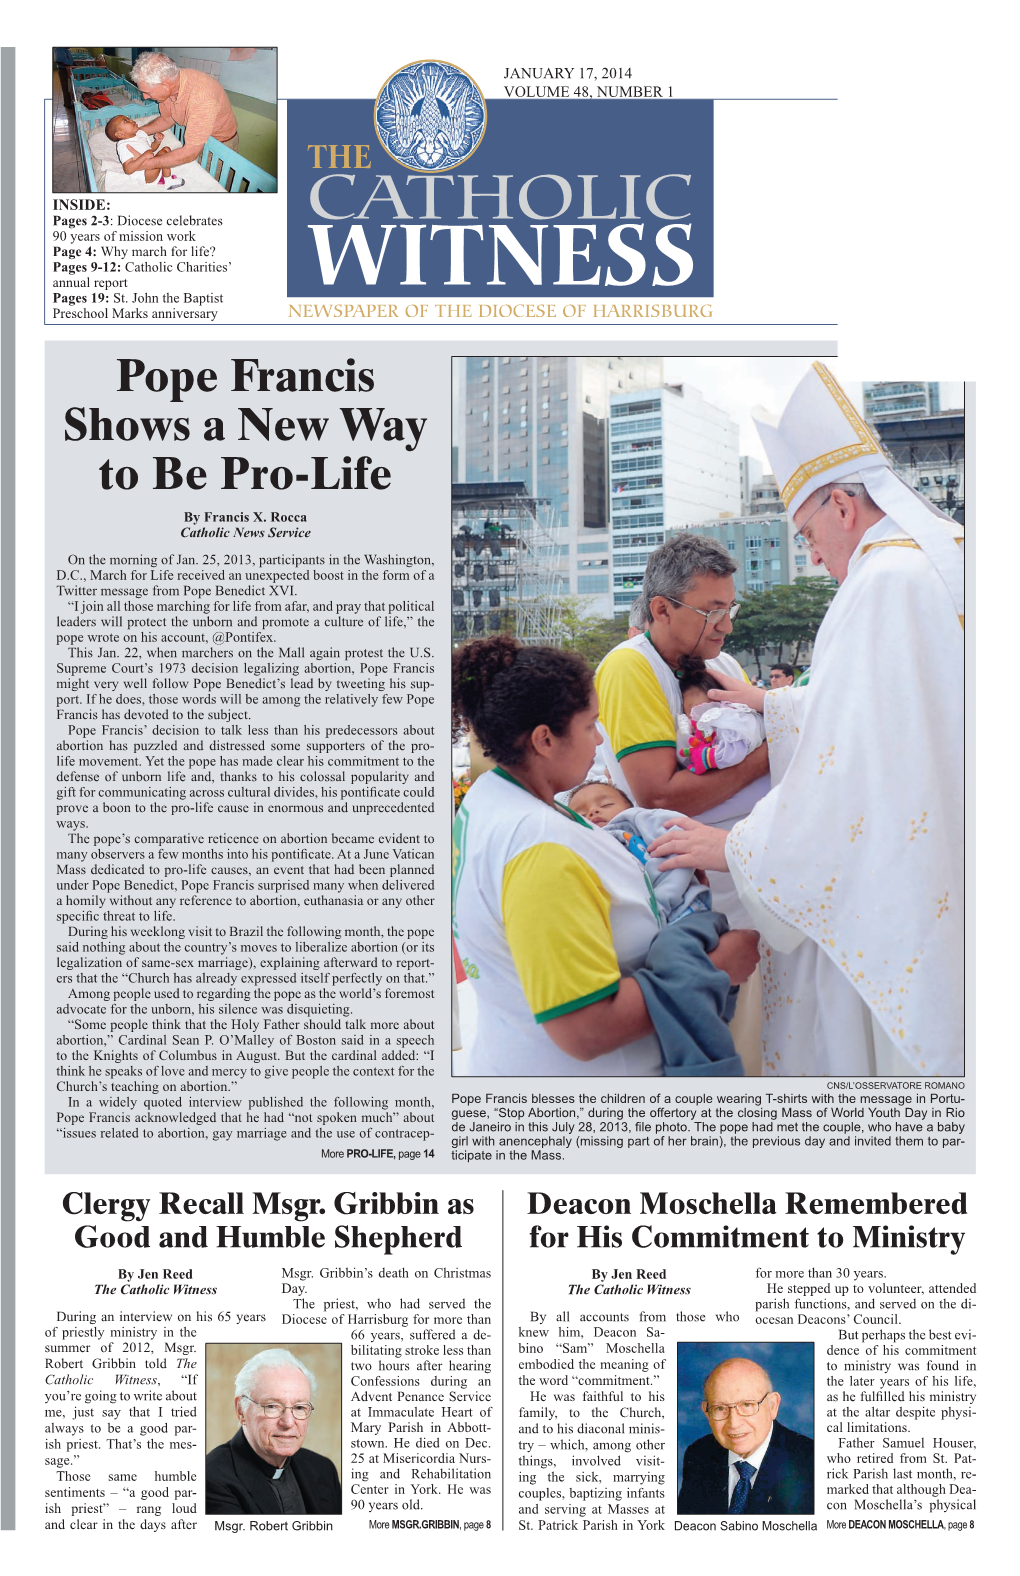 Pope Francis Shows a New Way to Be Pro-Life by Francis X